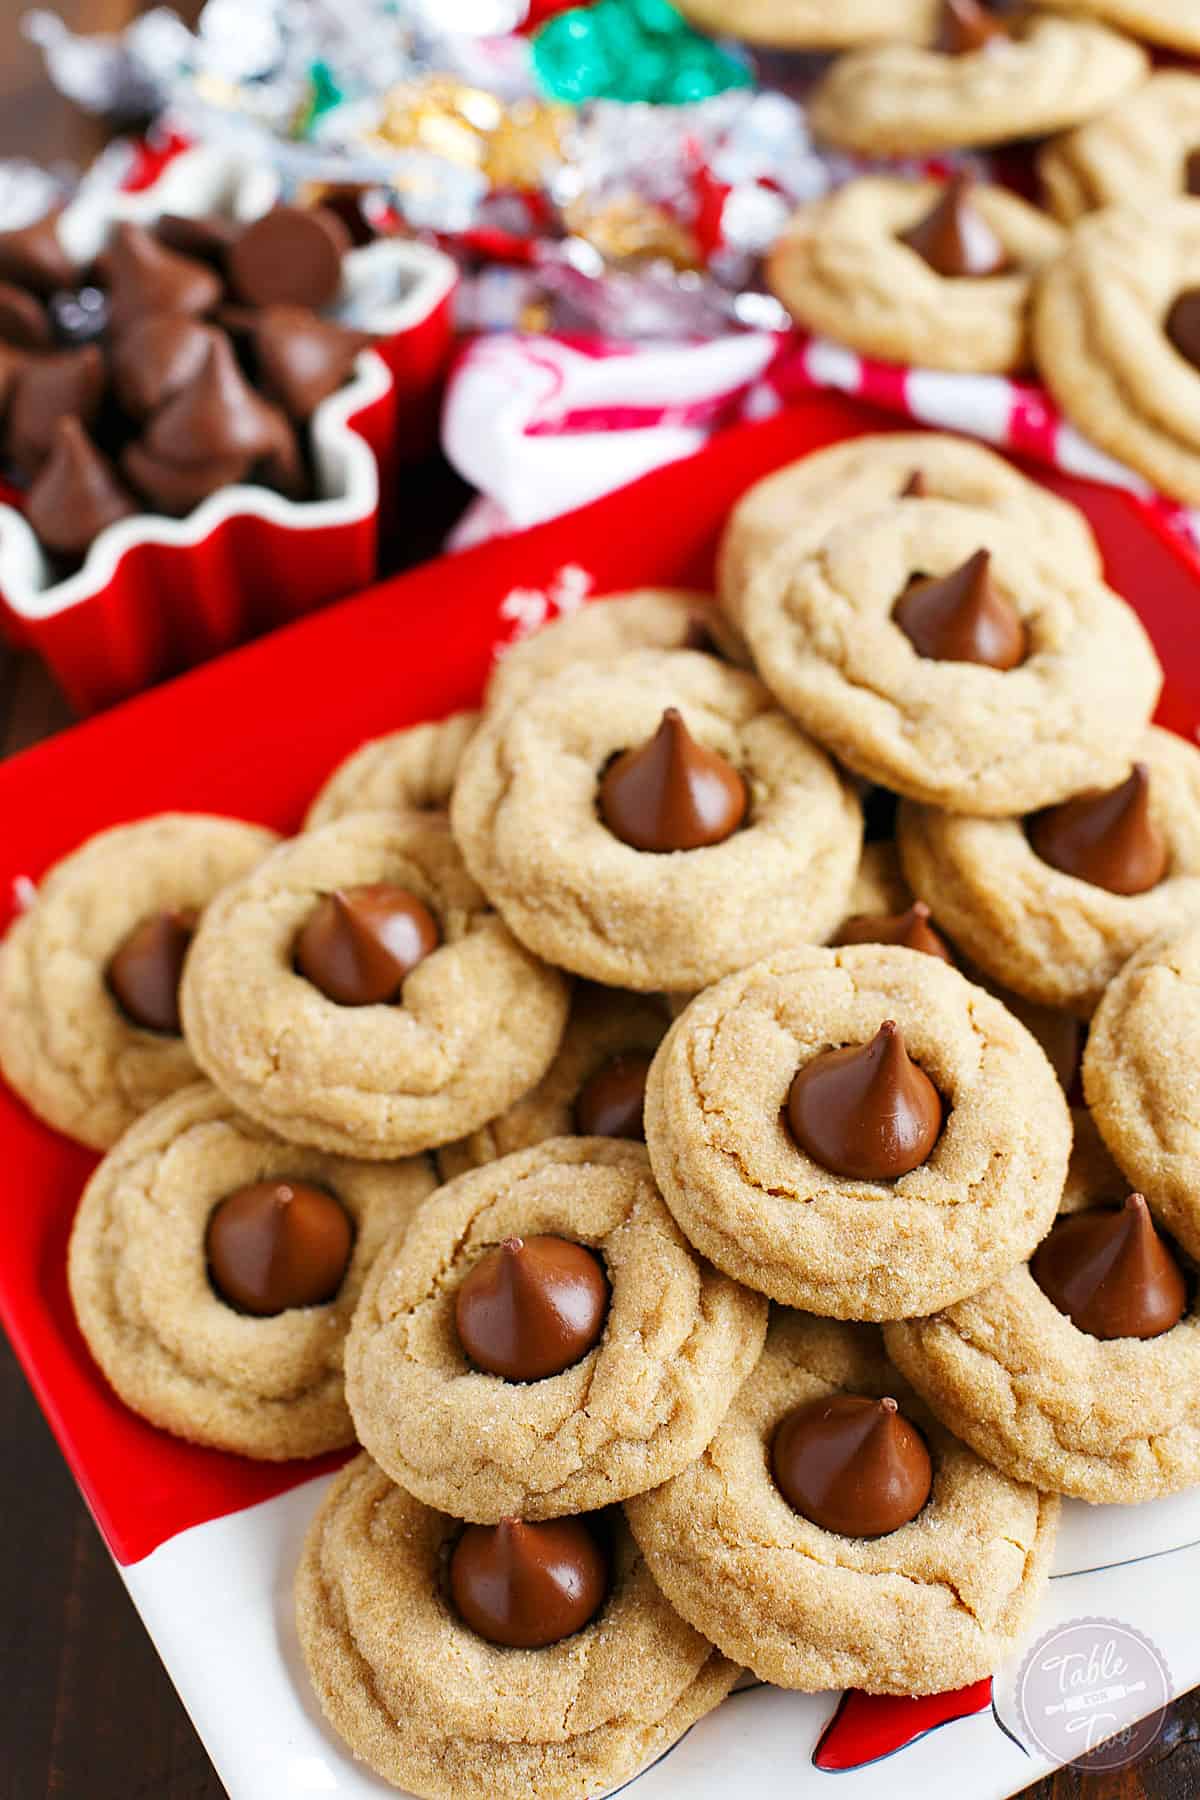 Peanut butter blossom cookies on a Christmas plate near unwrapped chocolate kisses.